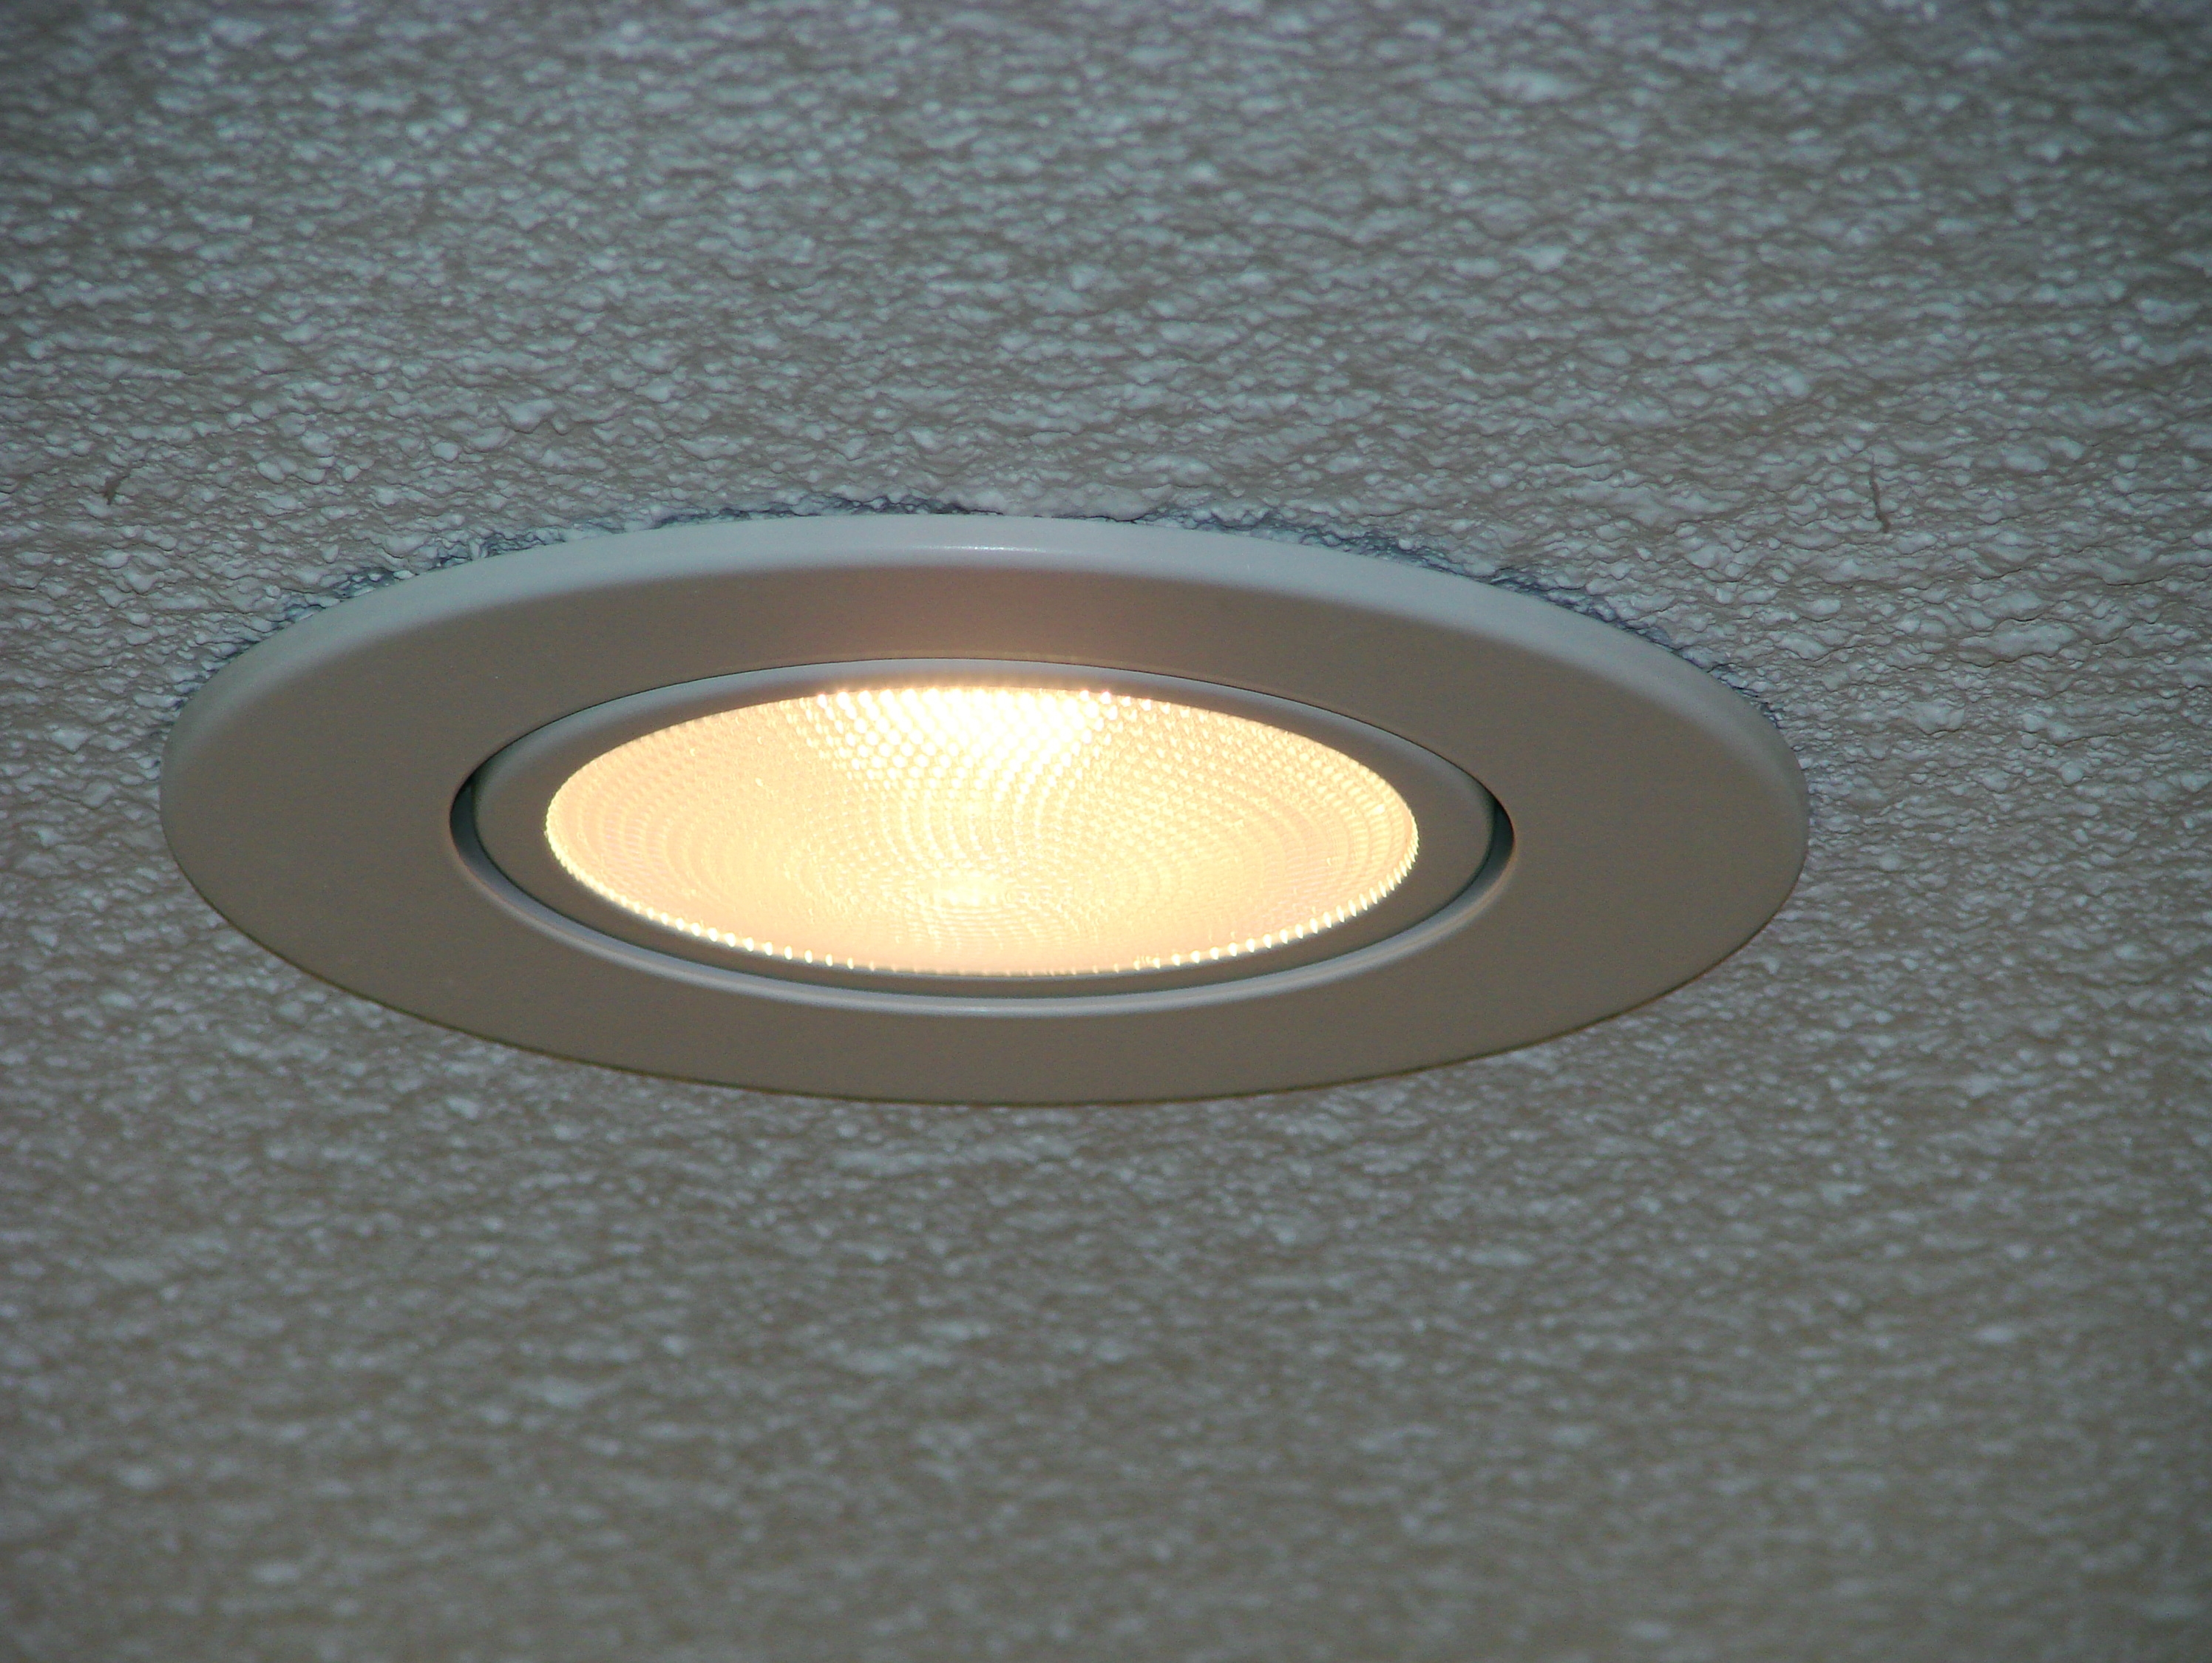 Light Covers For Recessed Ceiling Lights